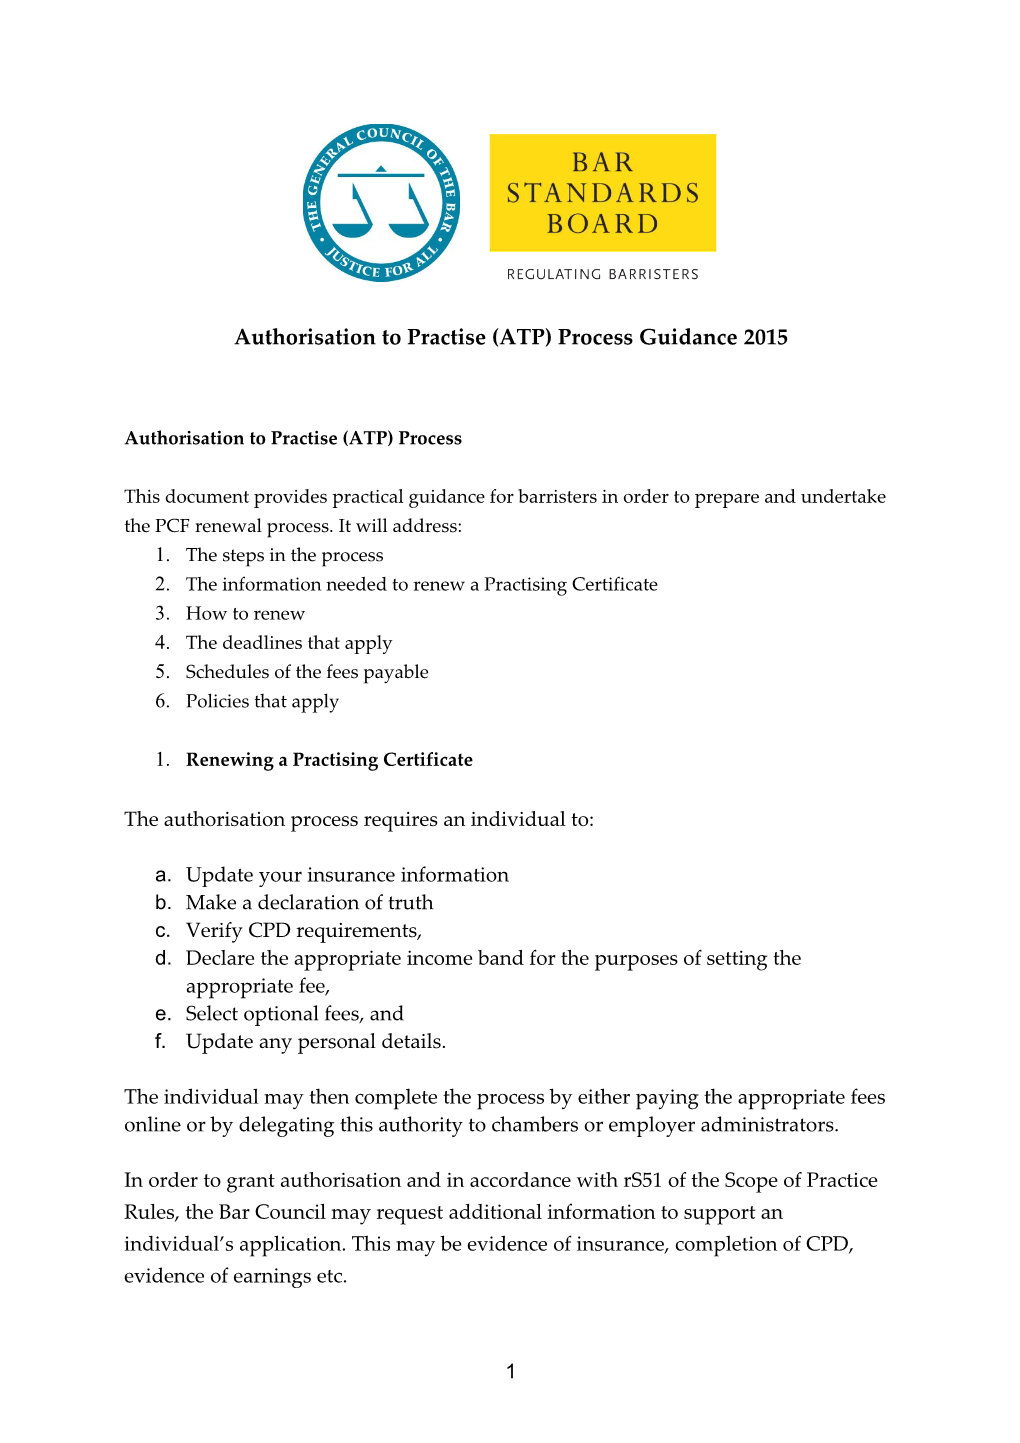 Authorisation to Practise (ATP) Process Guidance 2015